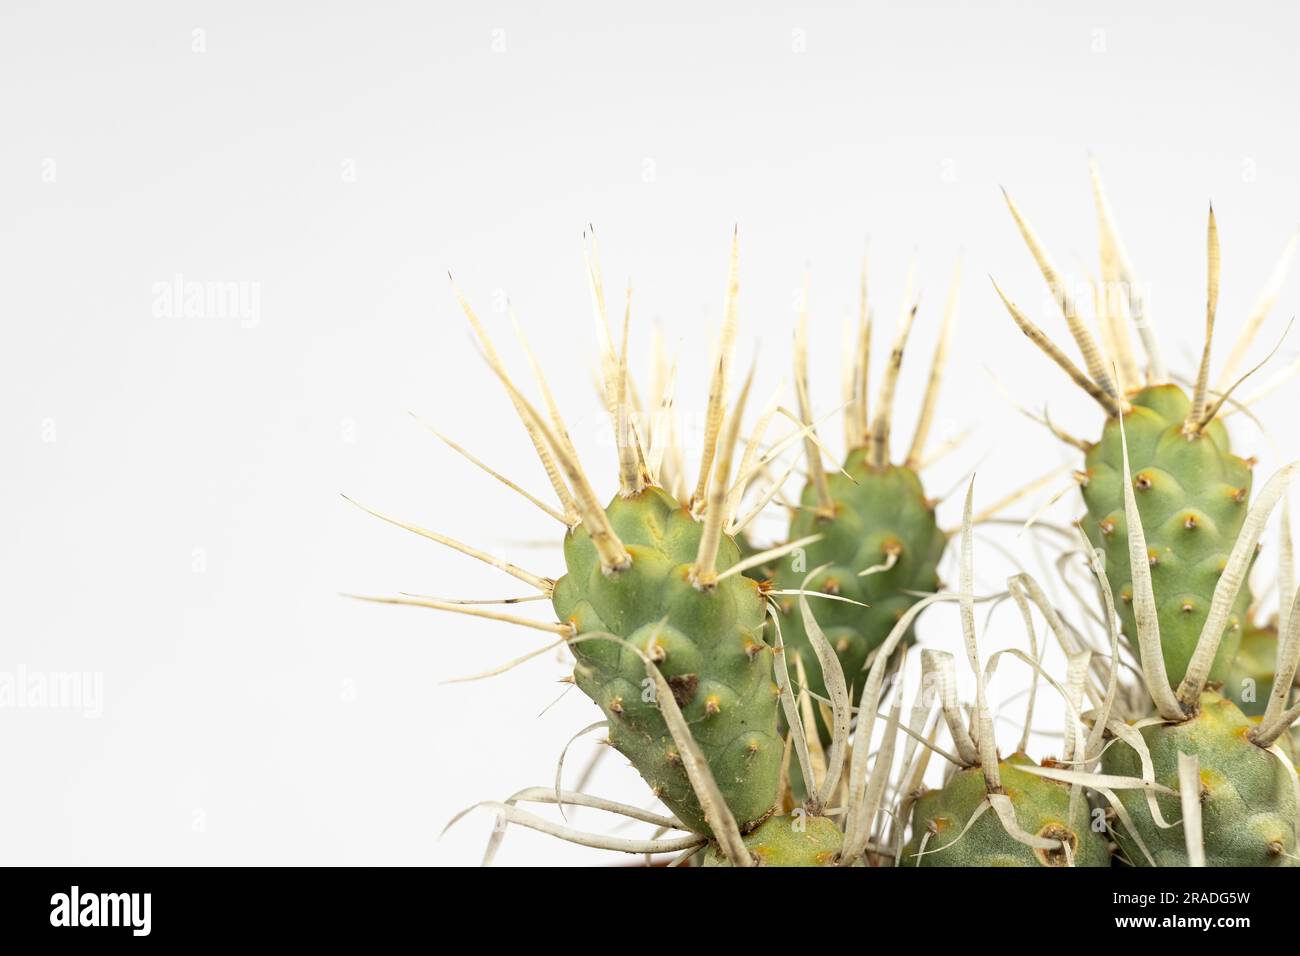 Paper spine cactus on white background with copy space. Stock Photo